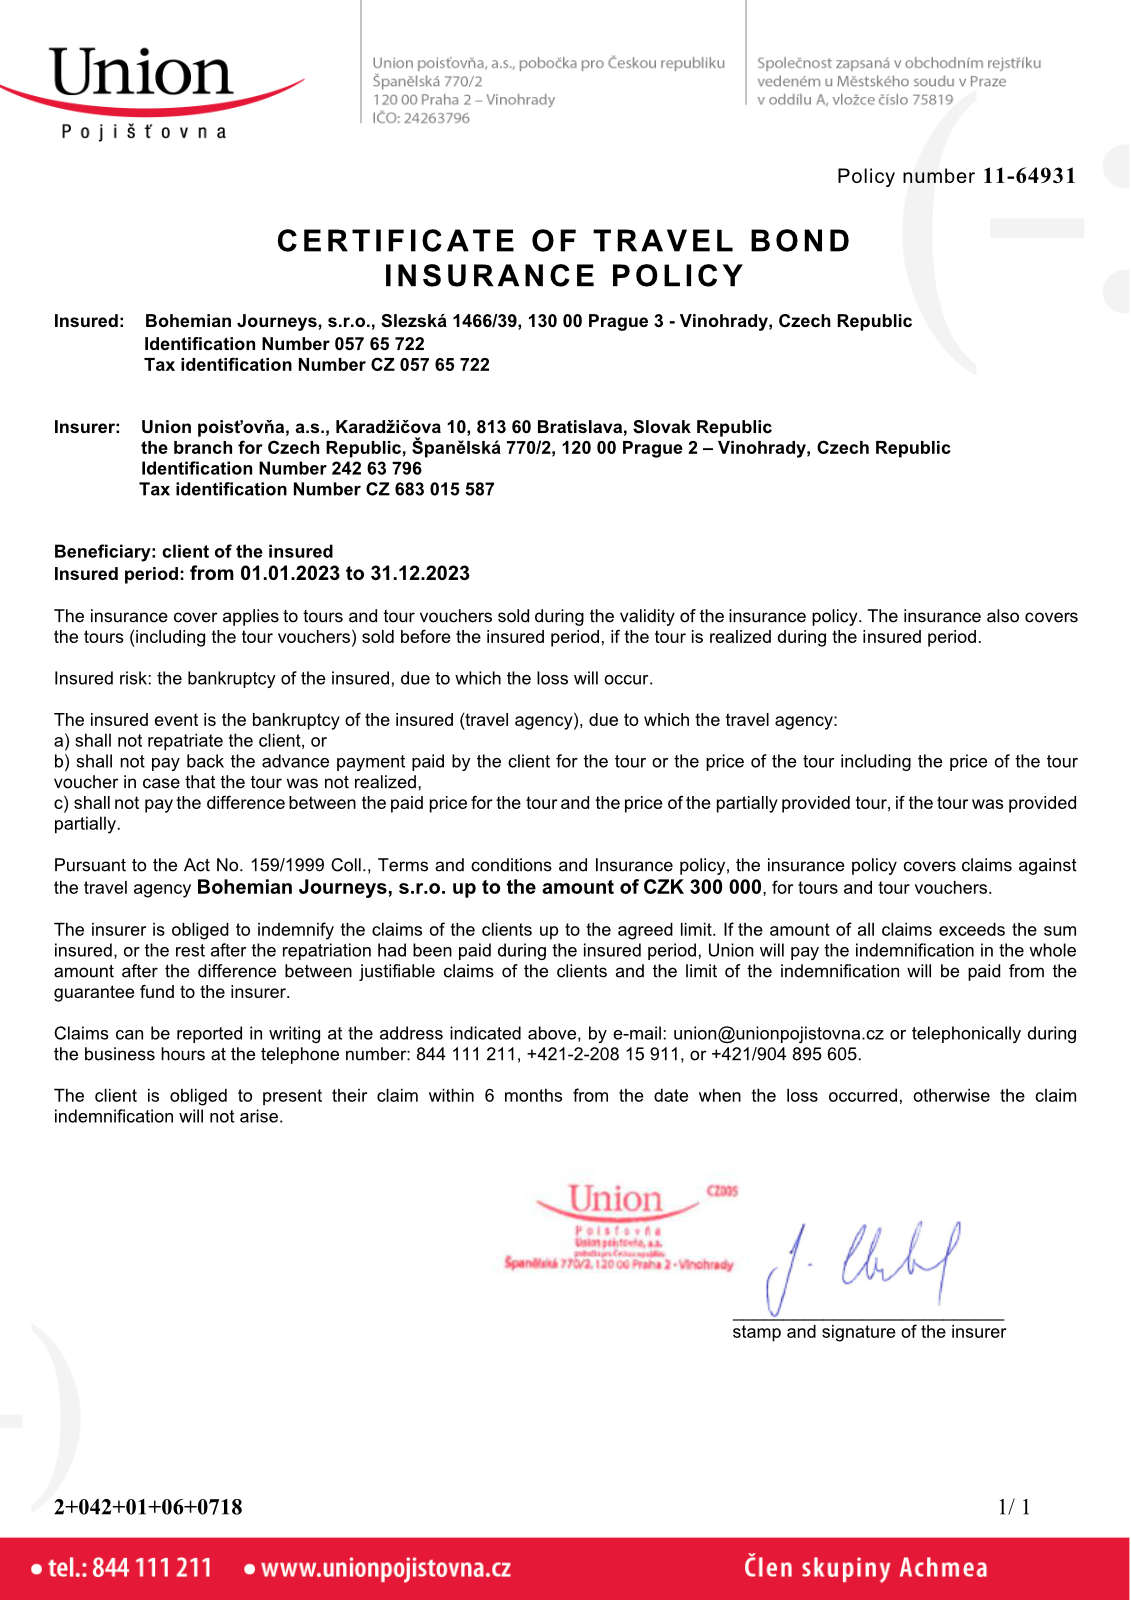 Certificate of travel bond insurance policy